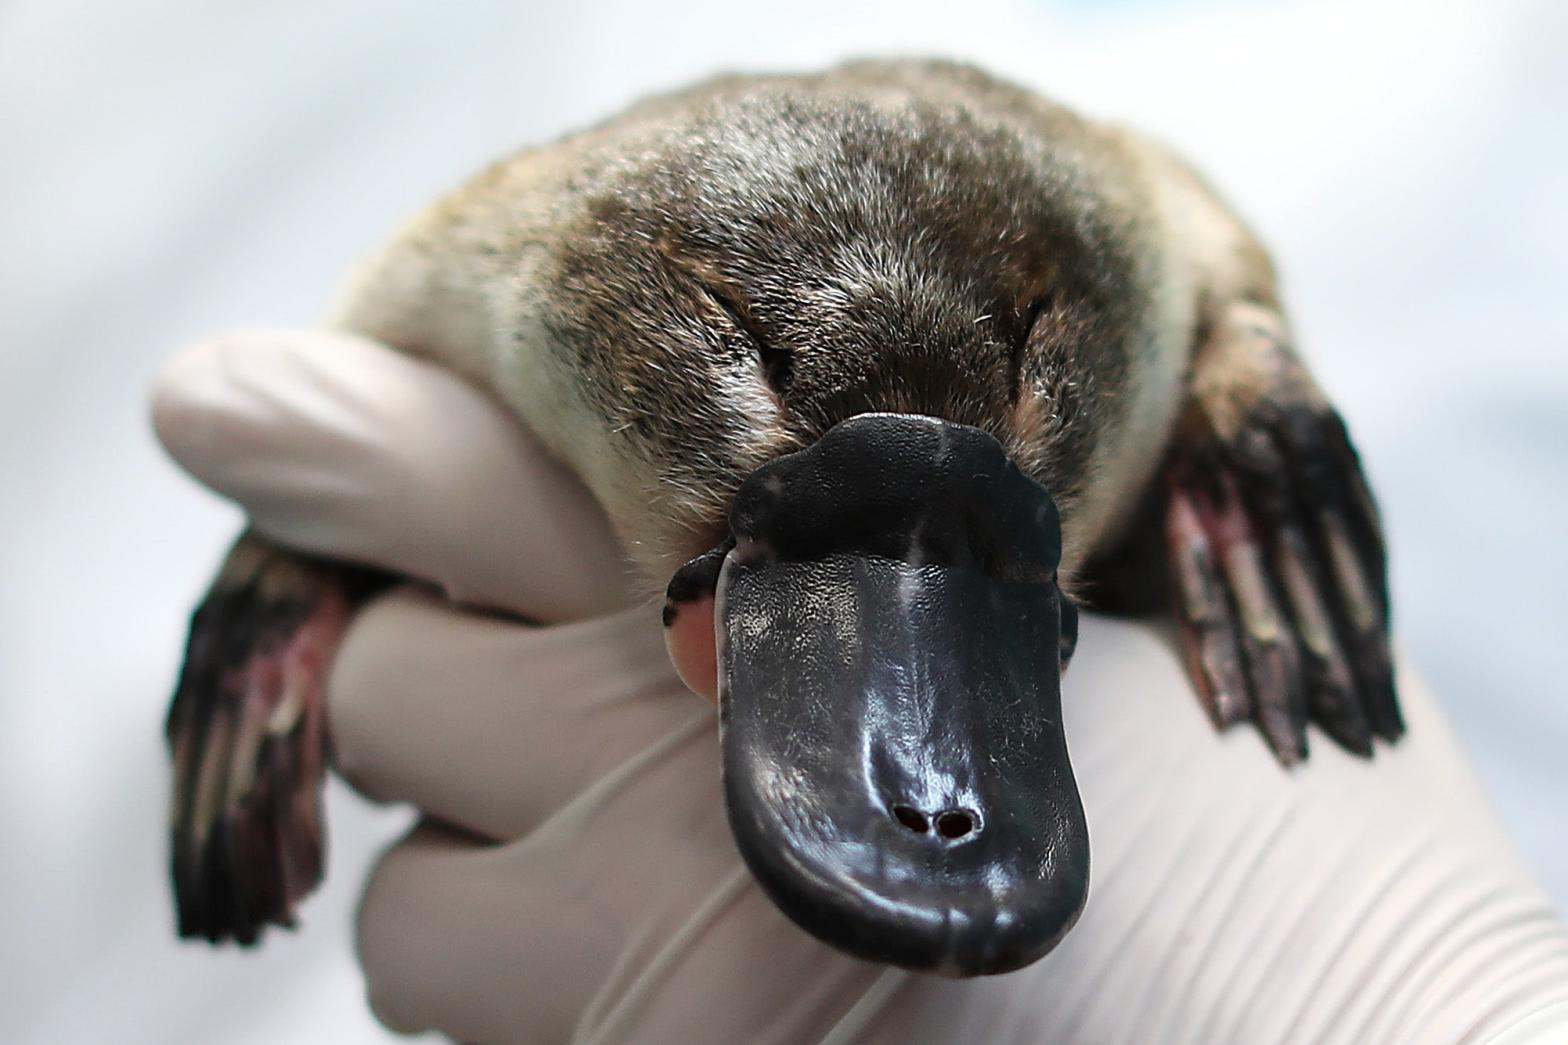 A platypus at the Taronga Zoo in Australia. (Photo: Mark Metcalfe, Getty Images)